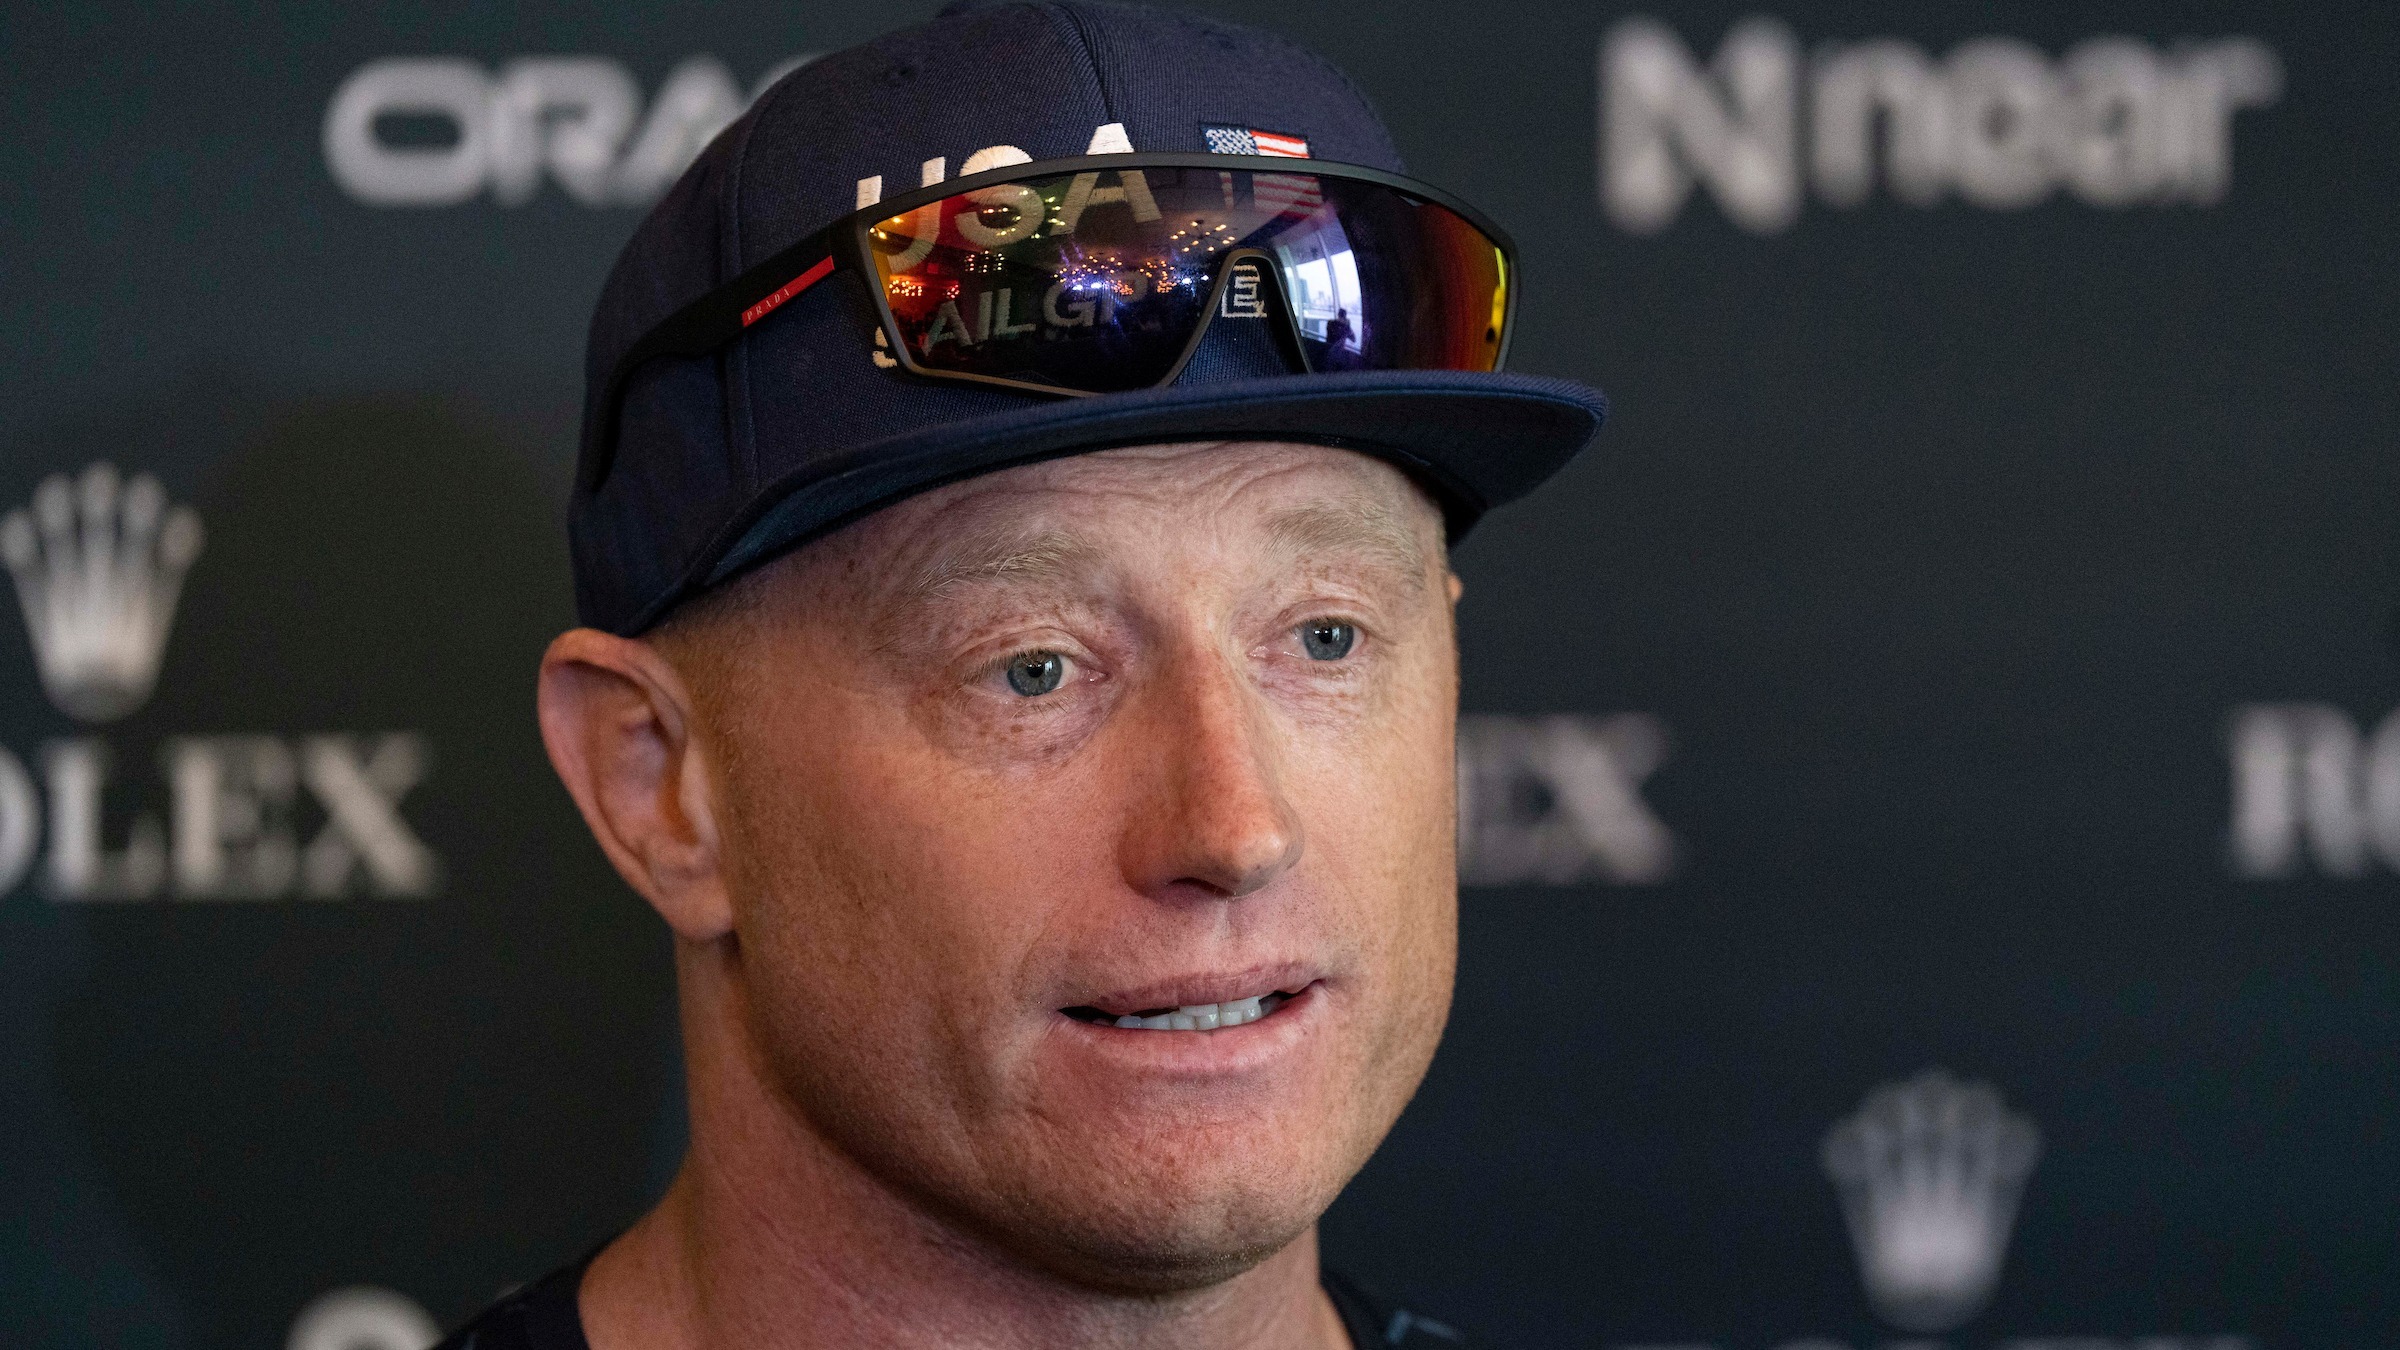 Season 4 // United States Sail Grand Prix Chicago // Jimmy Spithill at press conference